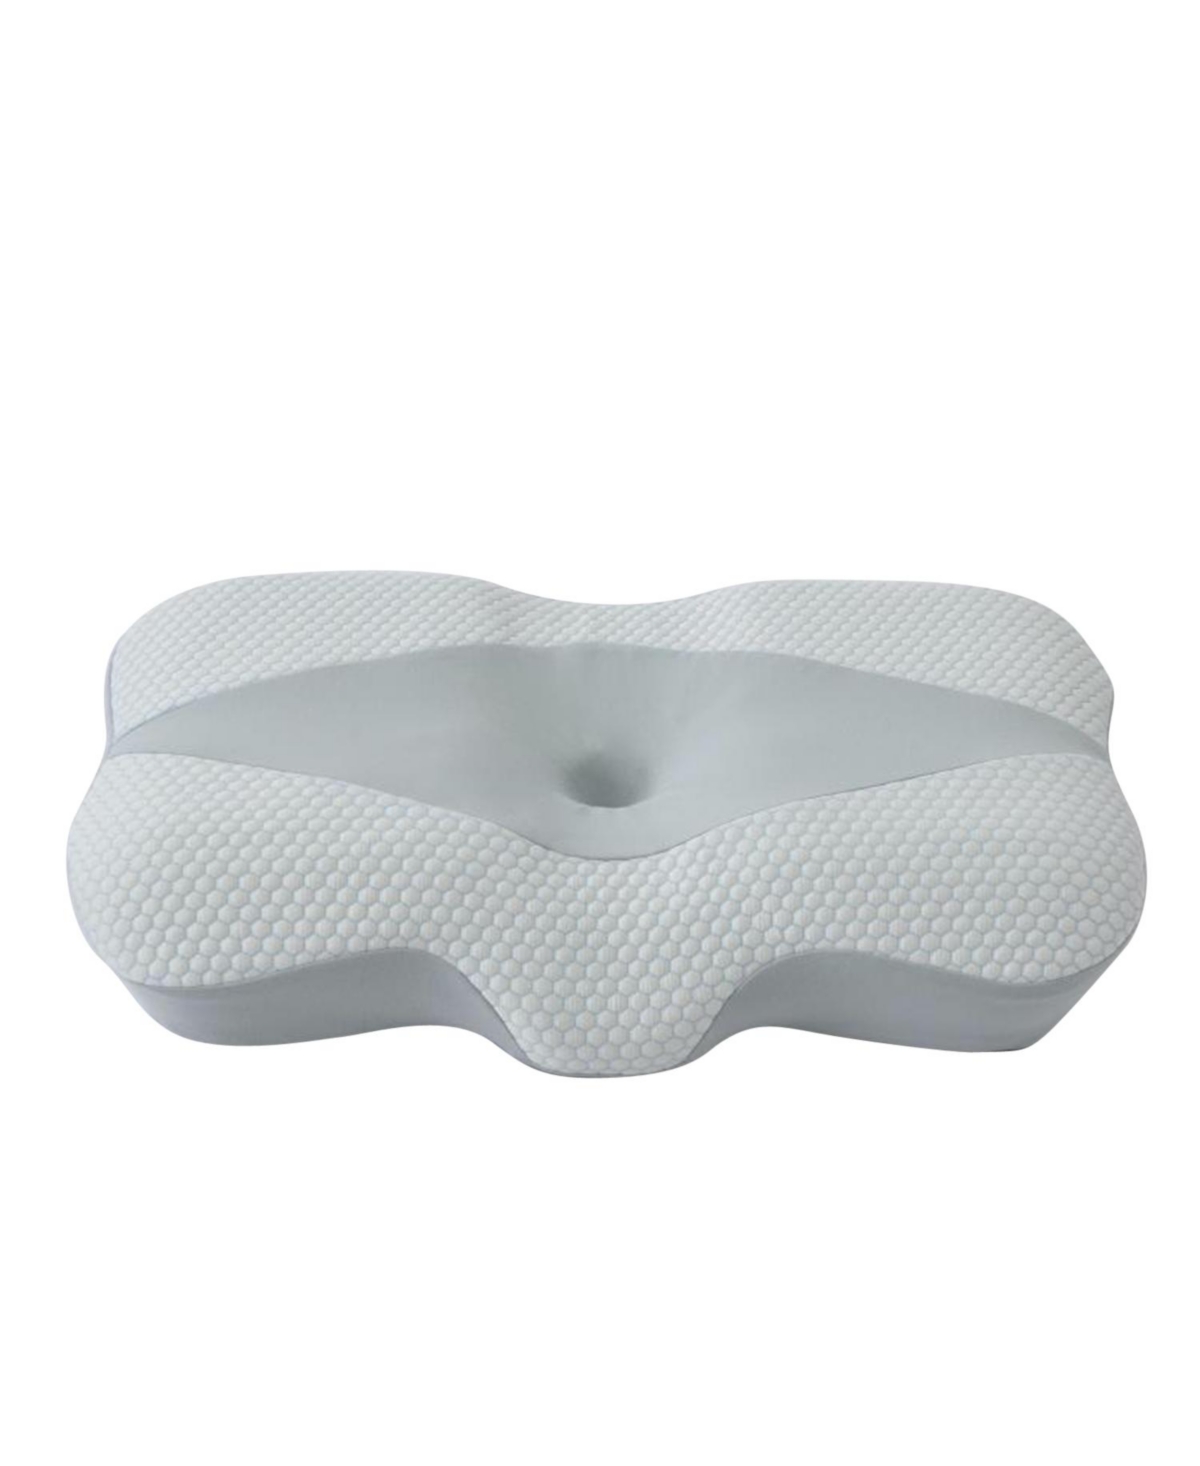 Dr Pillow Pure Face Pillow In White